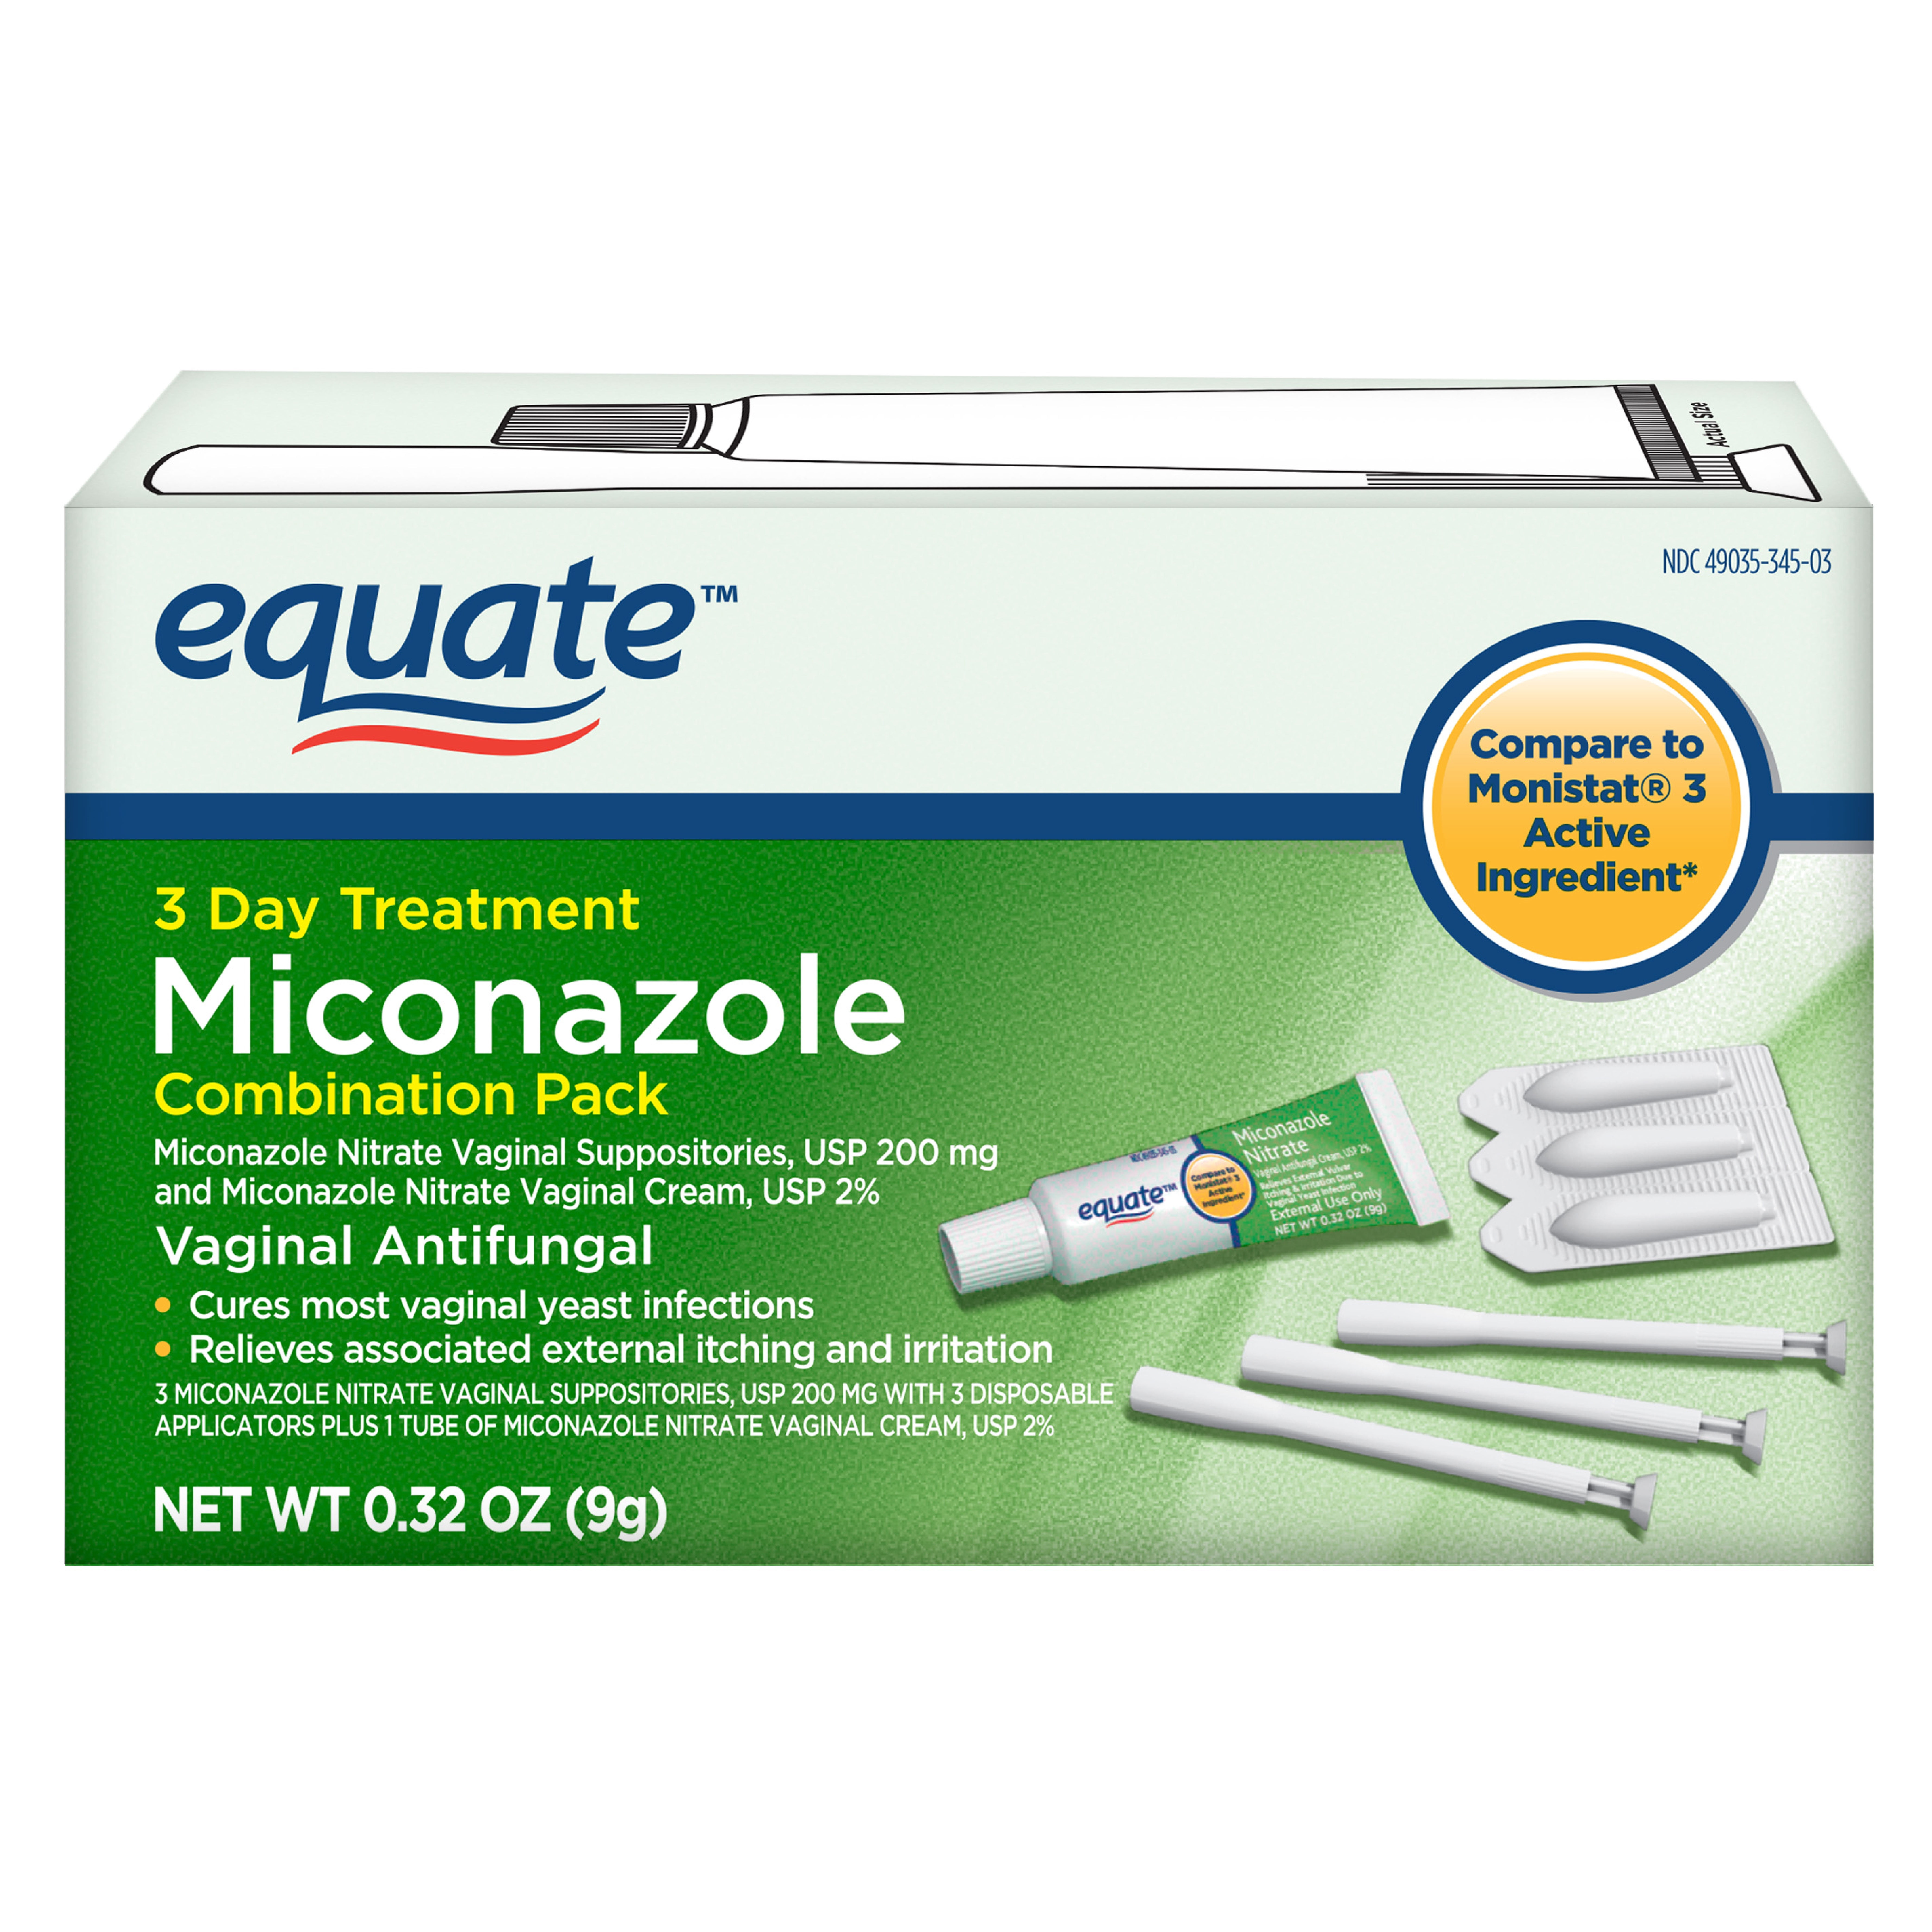 Equate Miconazole 3-Day Vaginal Cream Treatment Combination Pack